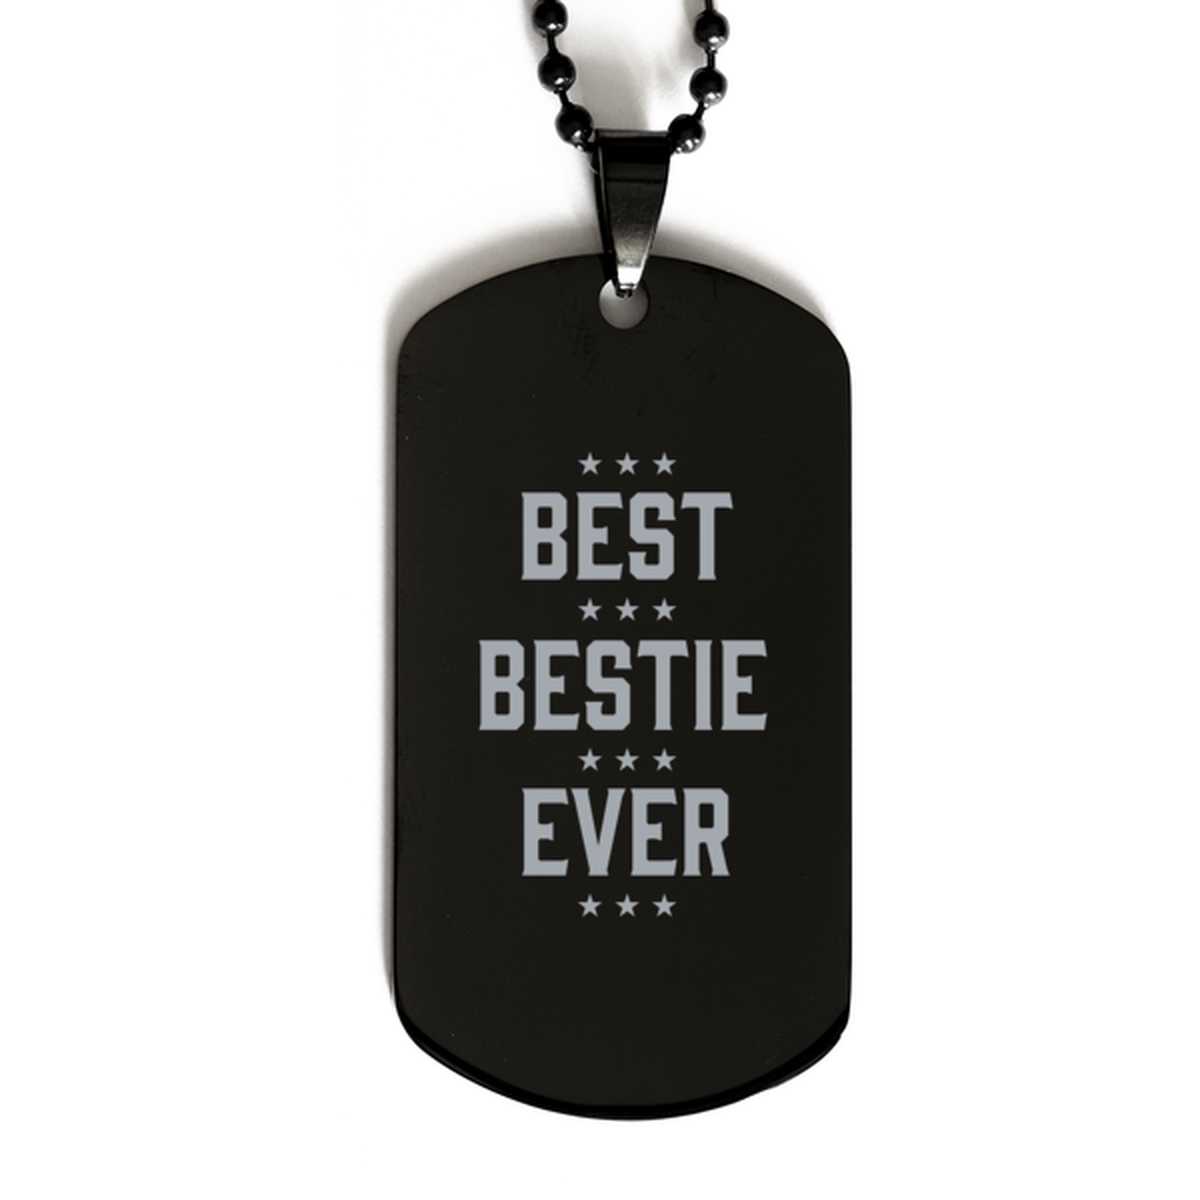 Best Bestie Ever Bestie Gifts, Funny Black Dog Tag For Bestie, Birthday Family Presents Engraved Necklace For Men Women